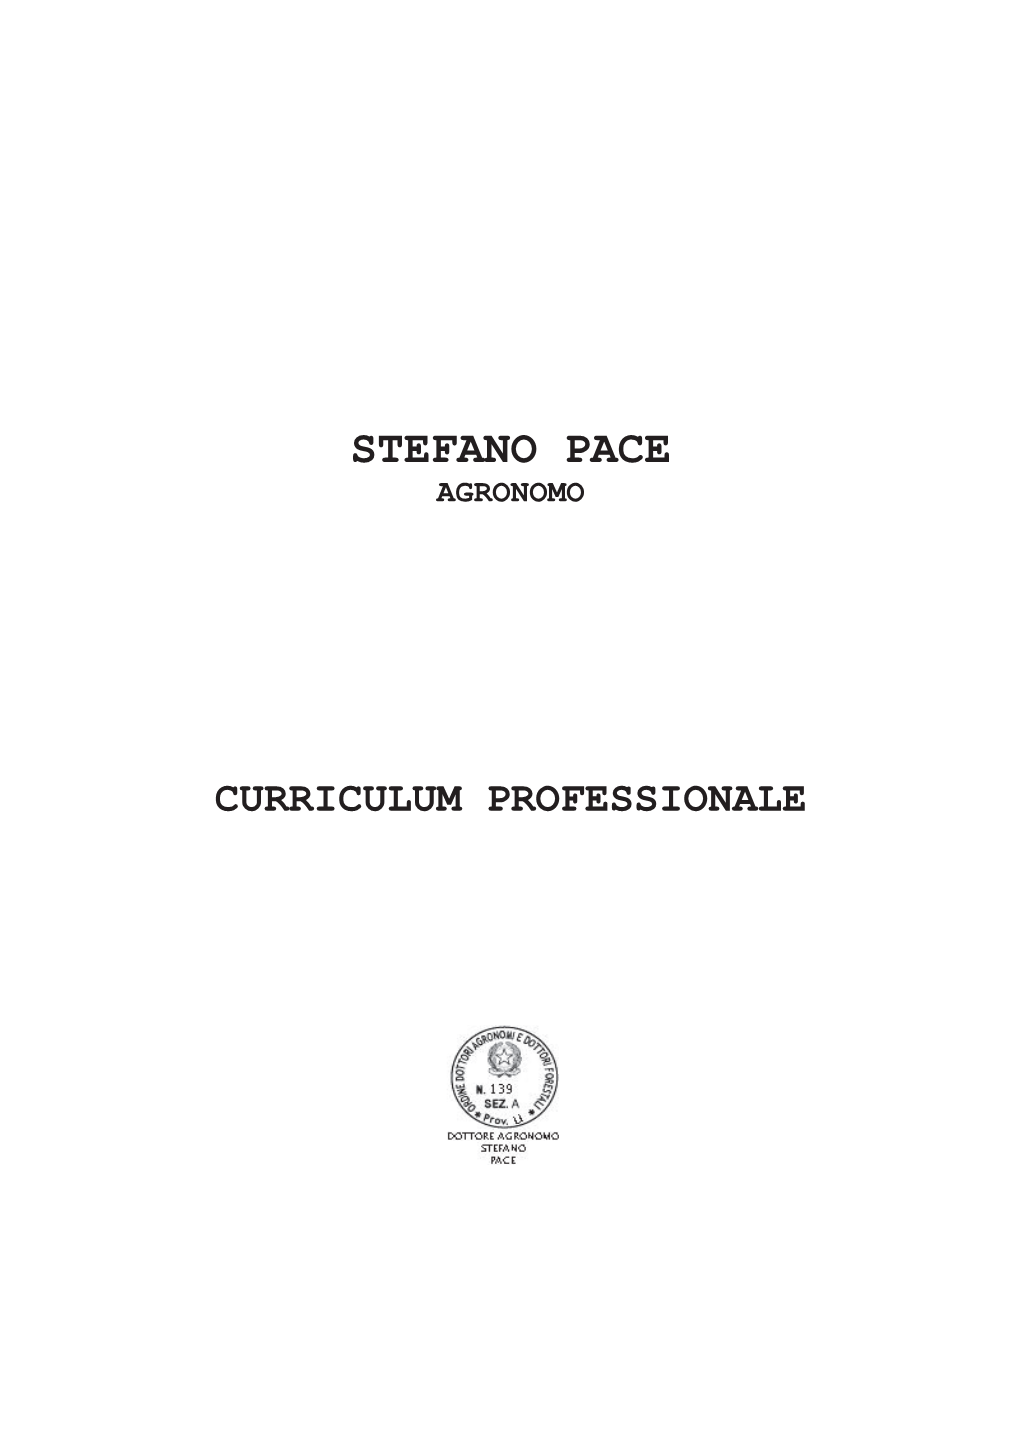 Stefano Pace Agronomo